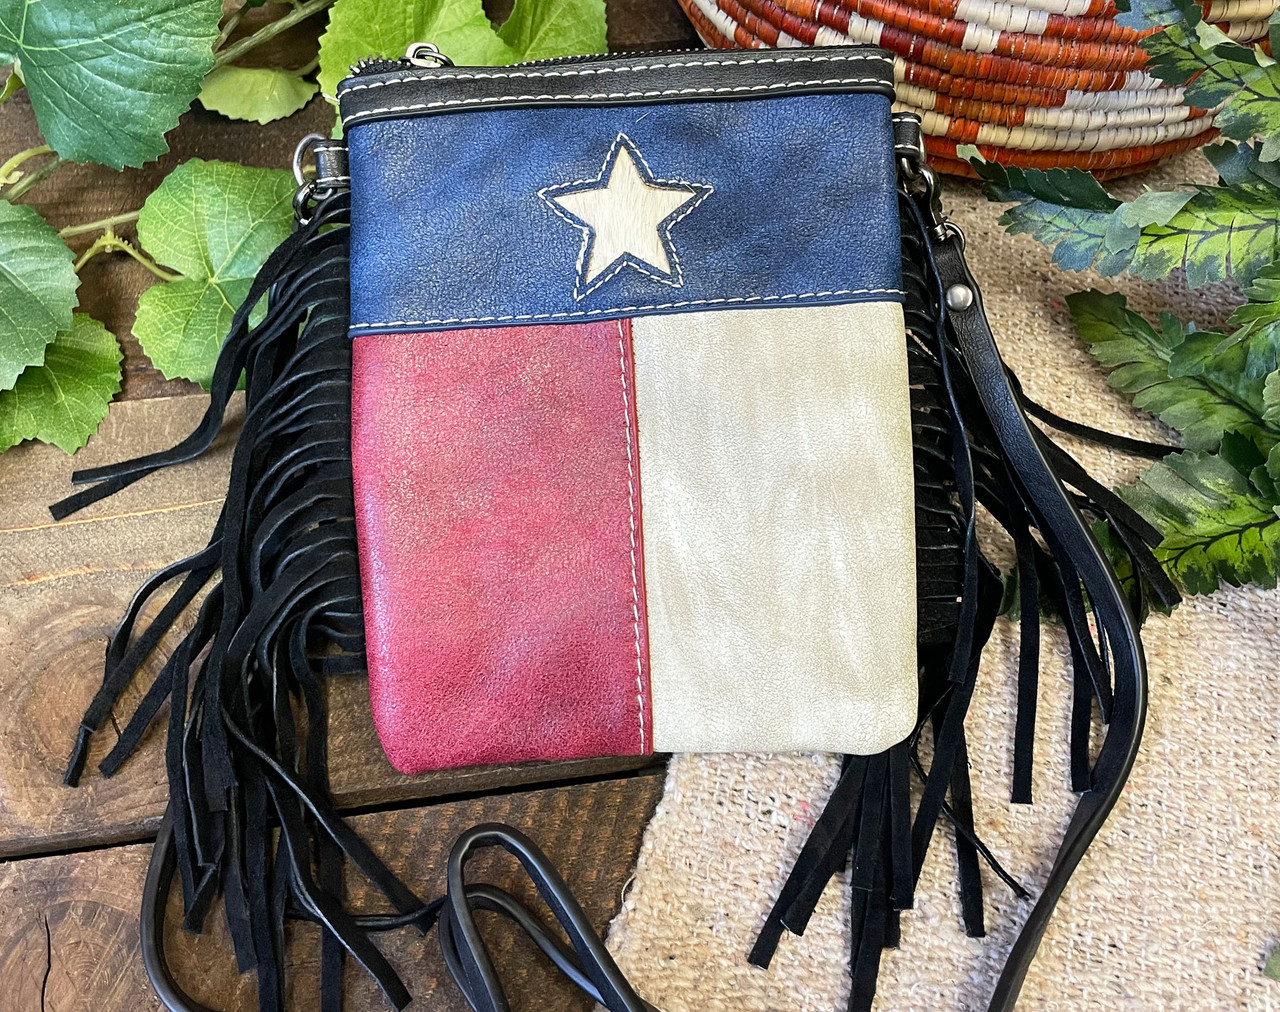 AD Tapestry and Leather Fringe Purse with a Crossbody Strap - Salt